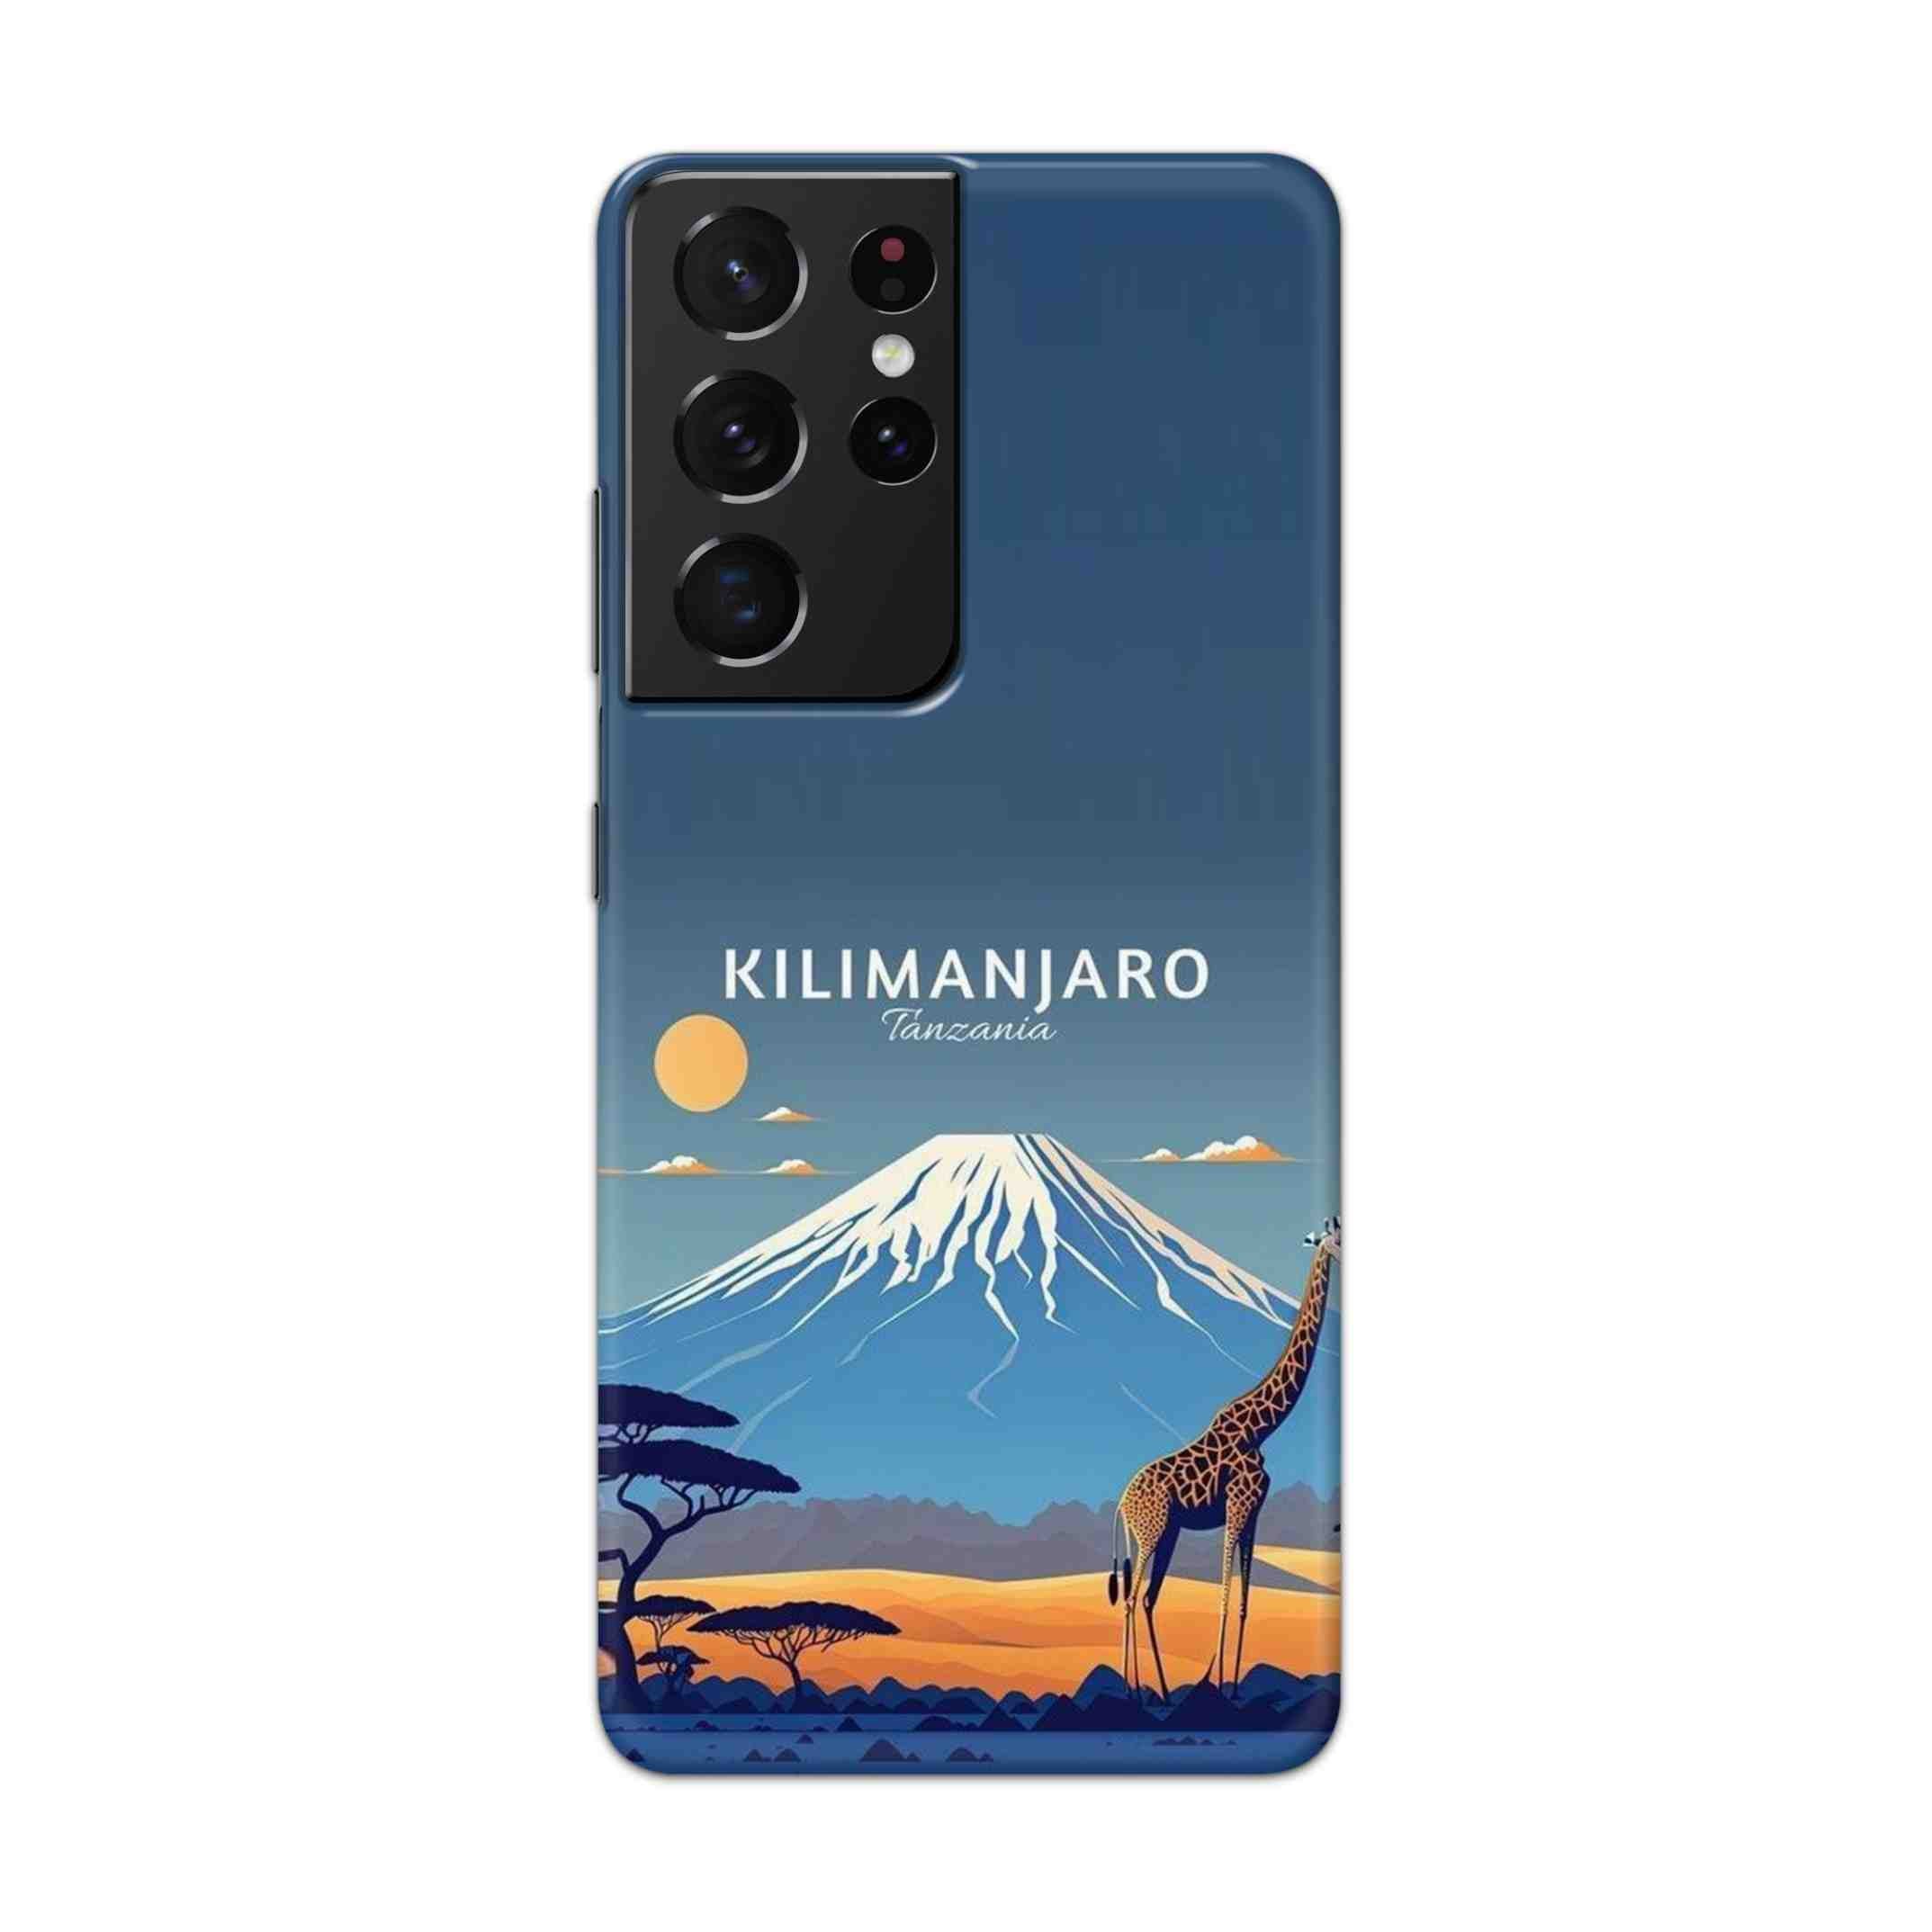 Buy Kilimanjaro Hard Back Mobile Phone Case Cover For Samsung Galaxy S21 Ultra Online